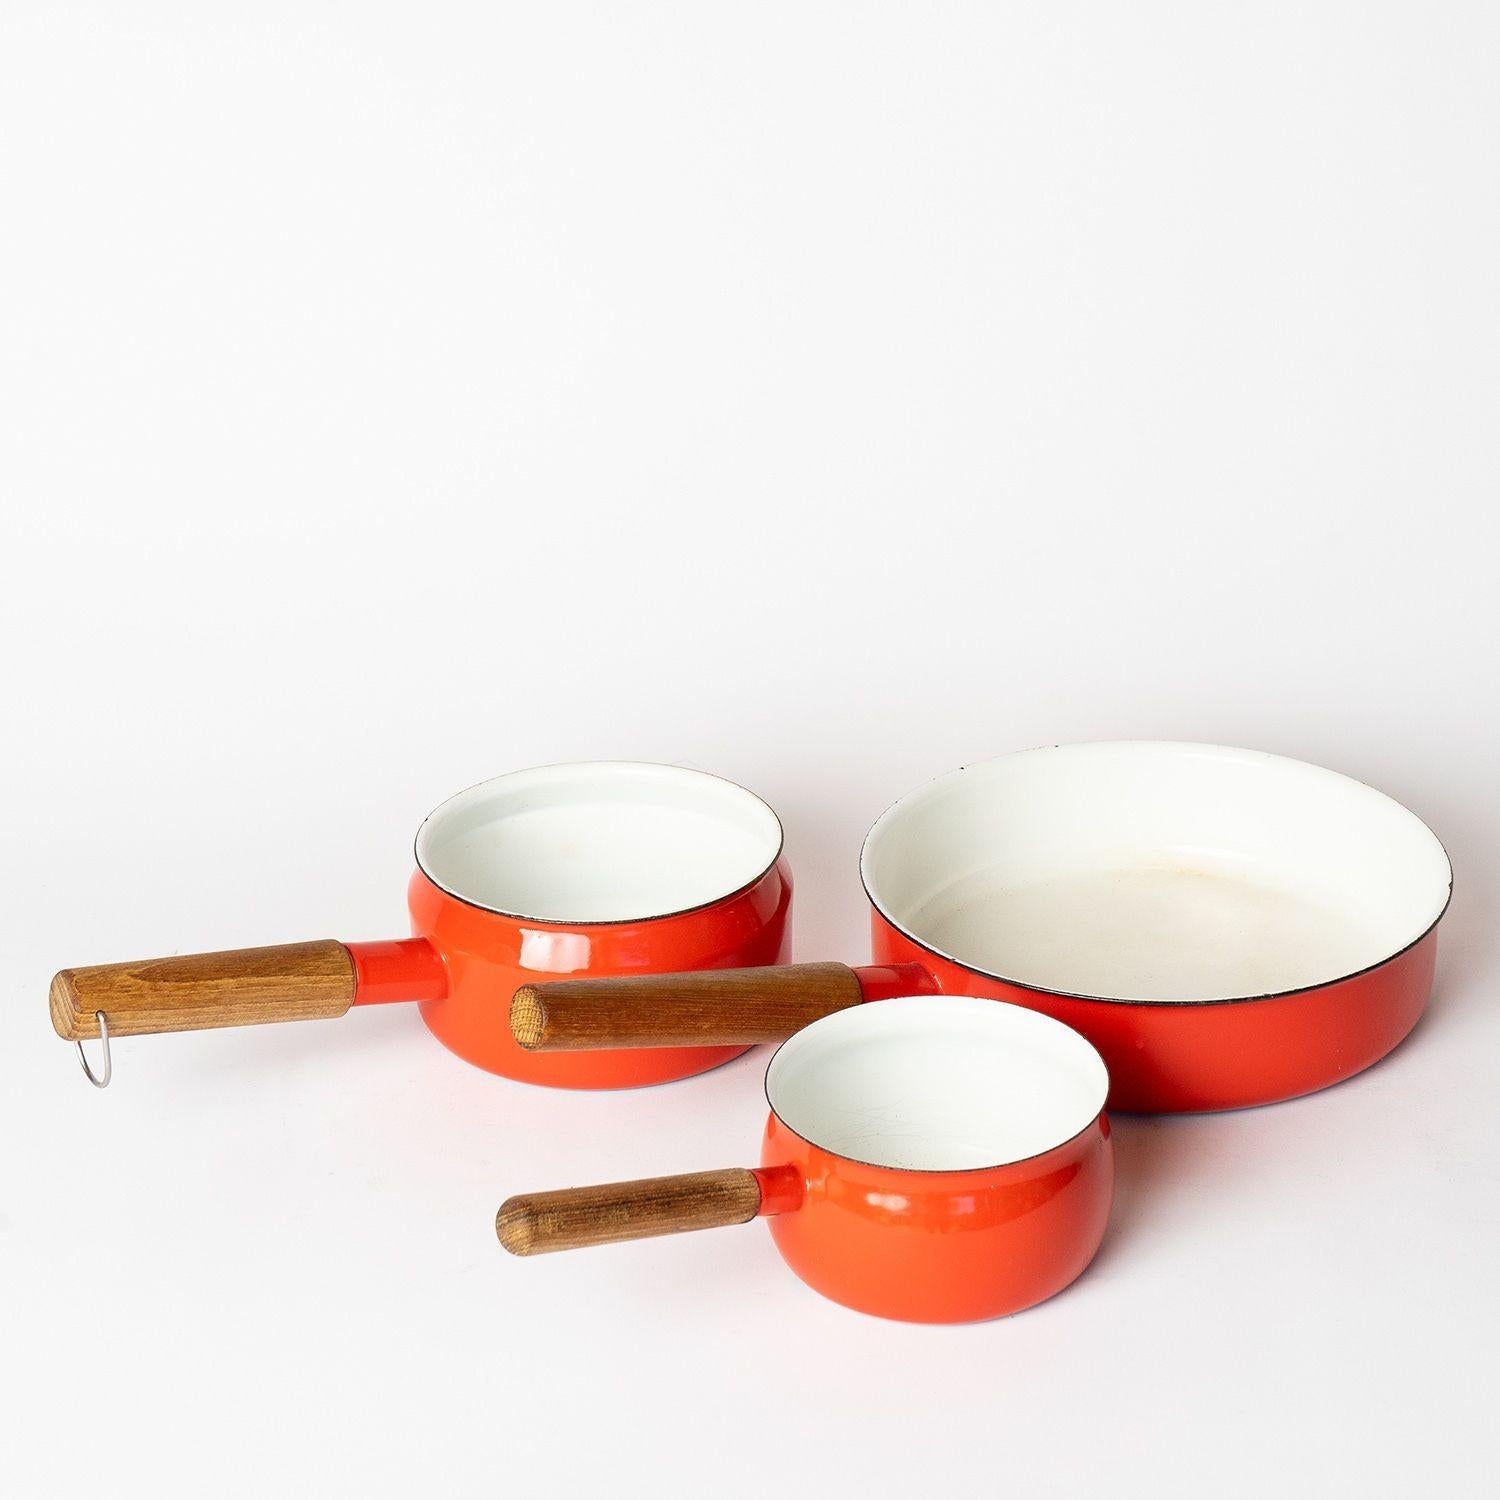 Set of Vintage Enamel Saucepans by Seppo Mallat for Finel Arabia Finland, 1960s For Sale 1